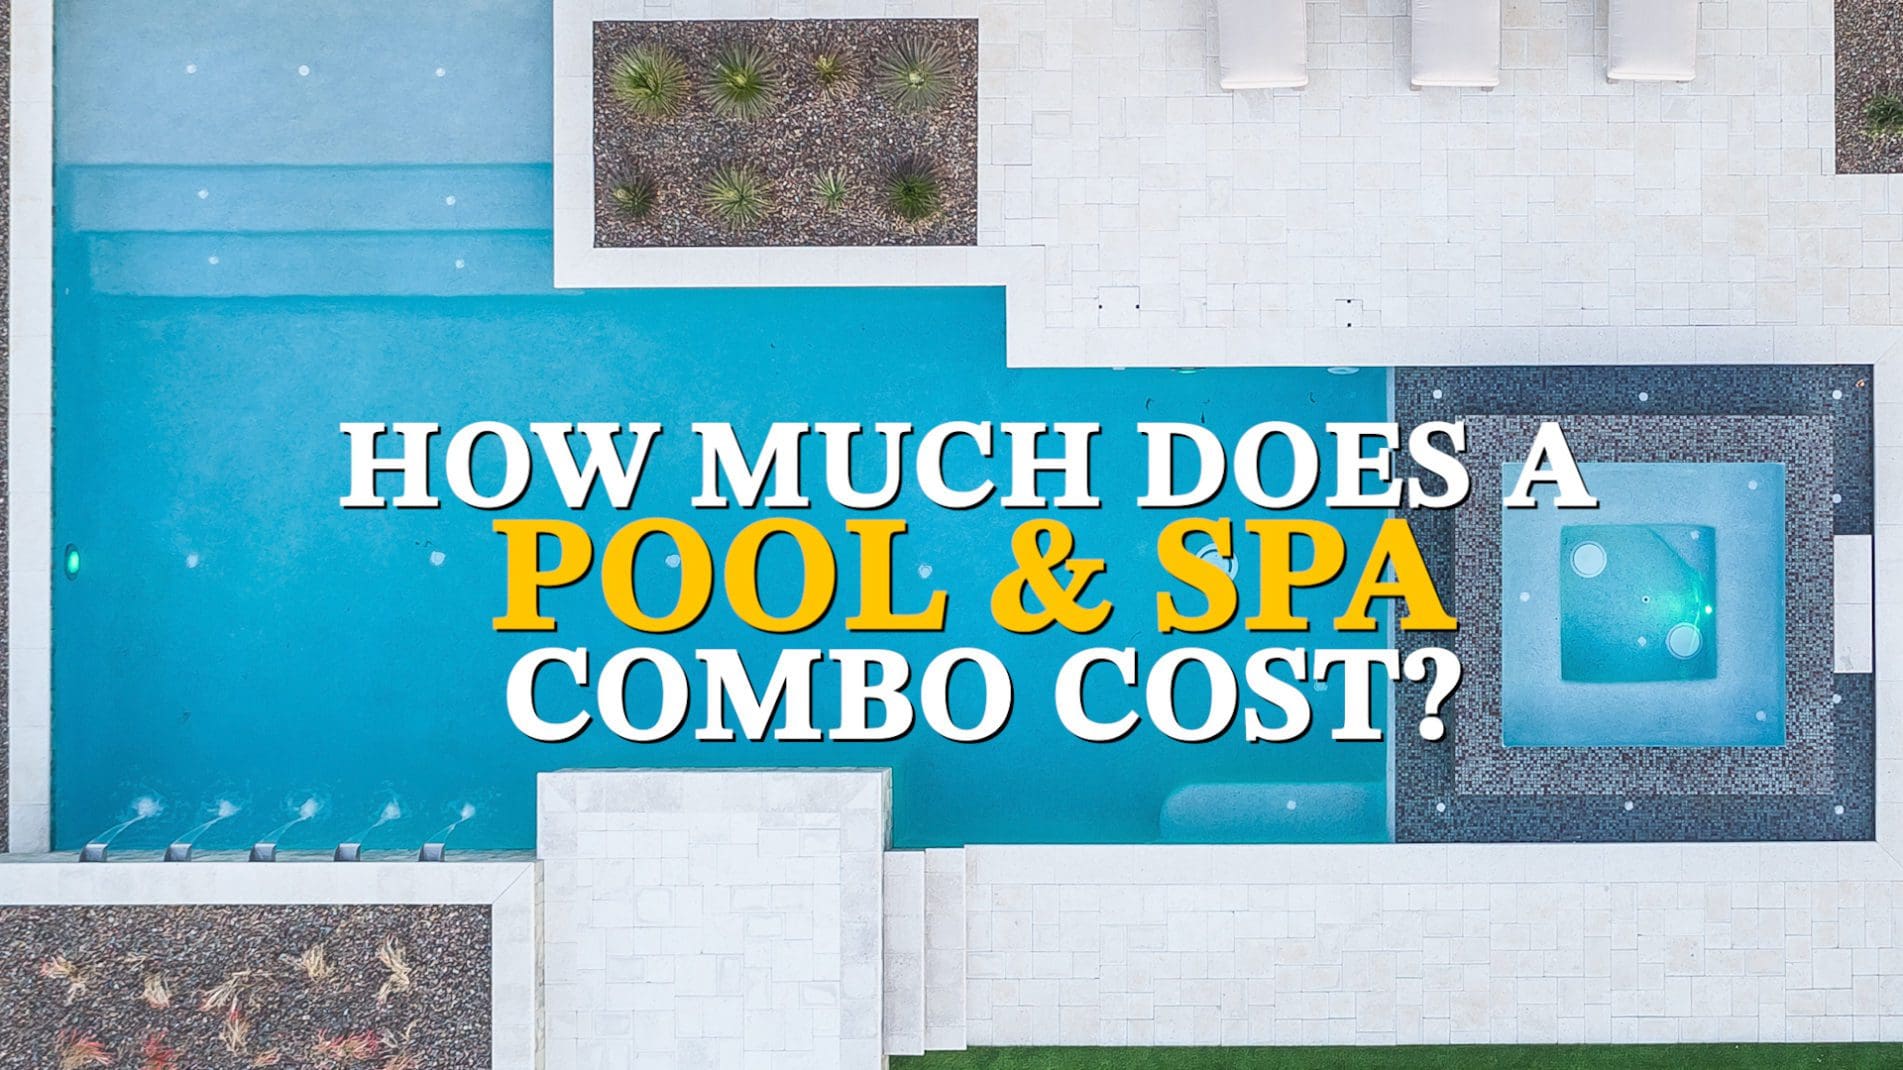 How Much Does An Inground Pool & Spa Cost?